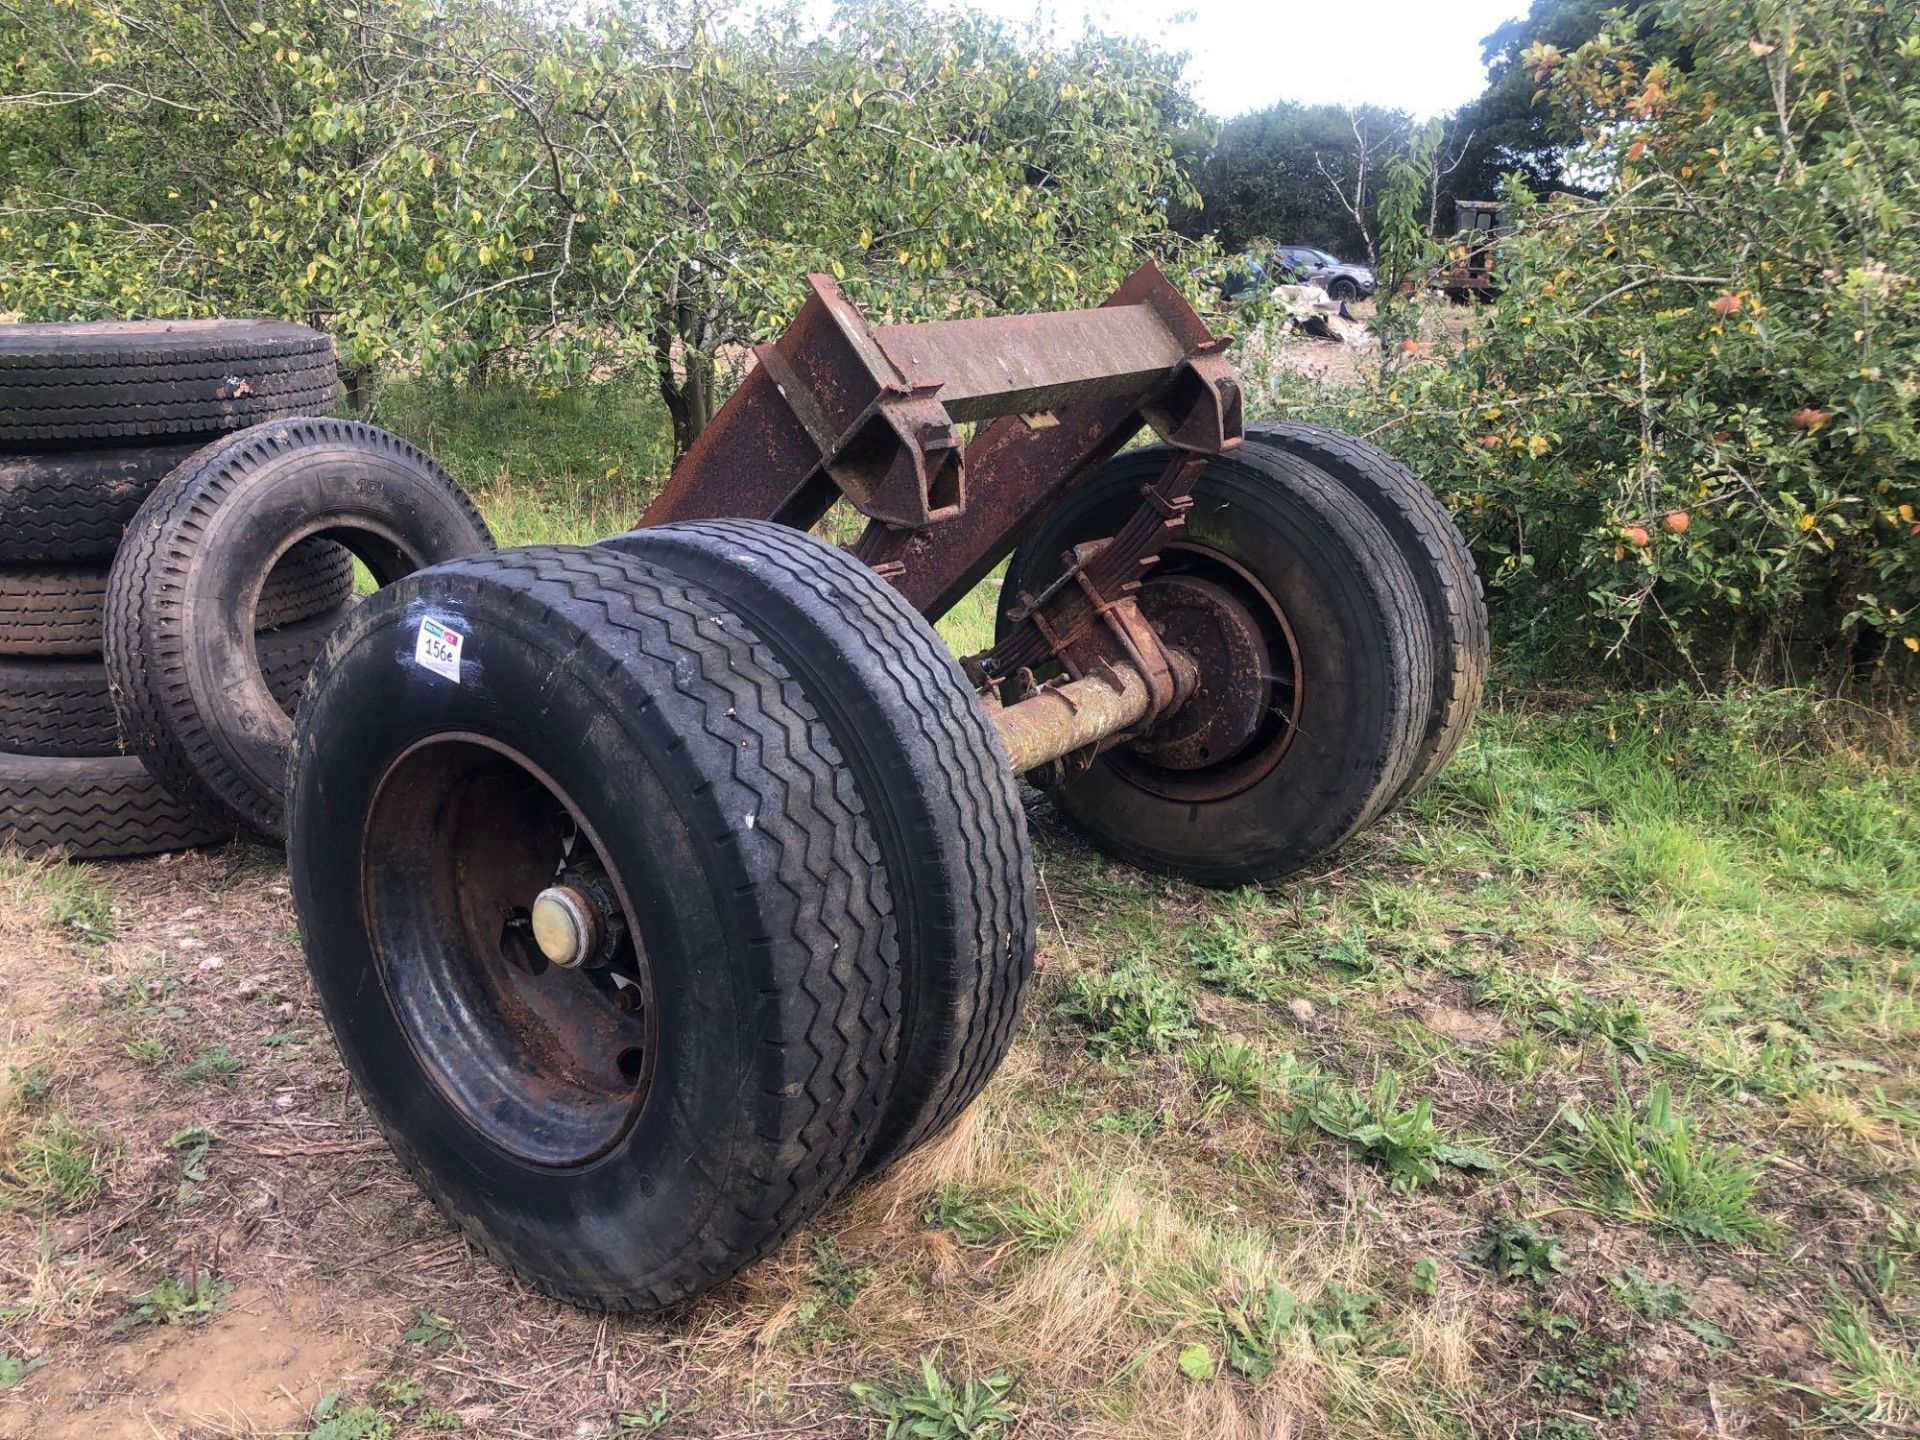 Twin wheel axle with 22.5/11-22.5 with wheels and tyres